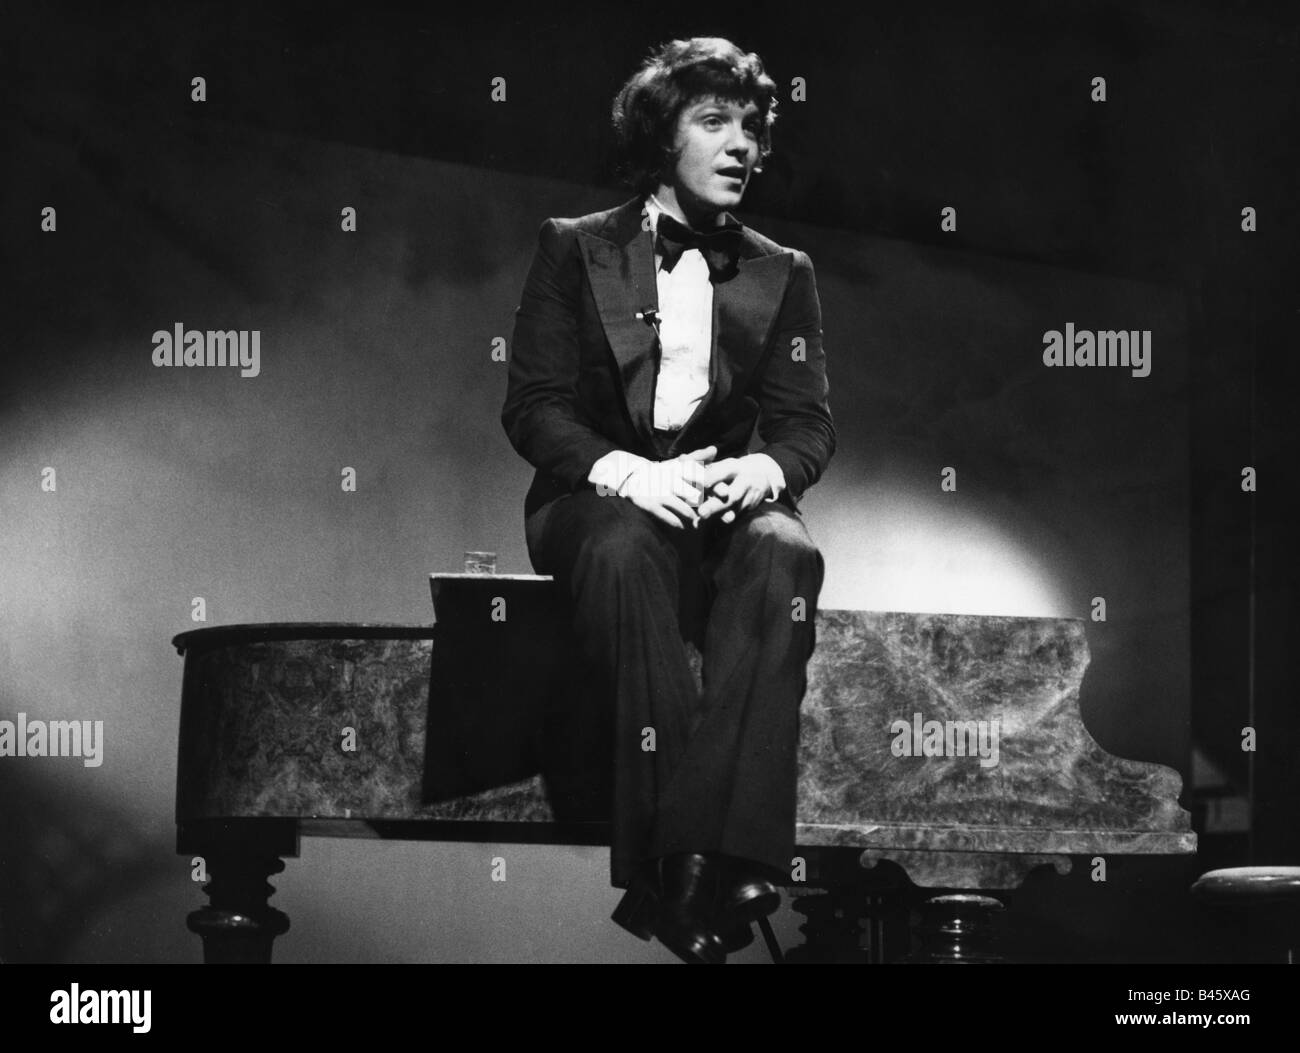 Sitting at the piano Black and White Stock Photos & Images - Page 2 - Alamy